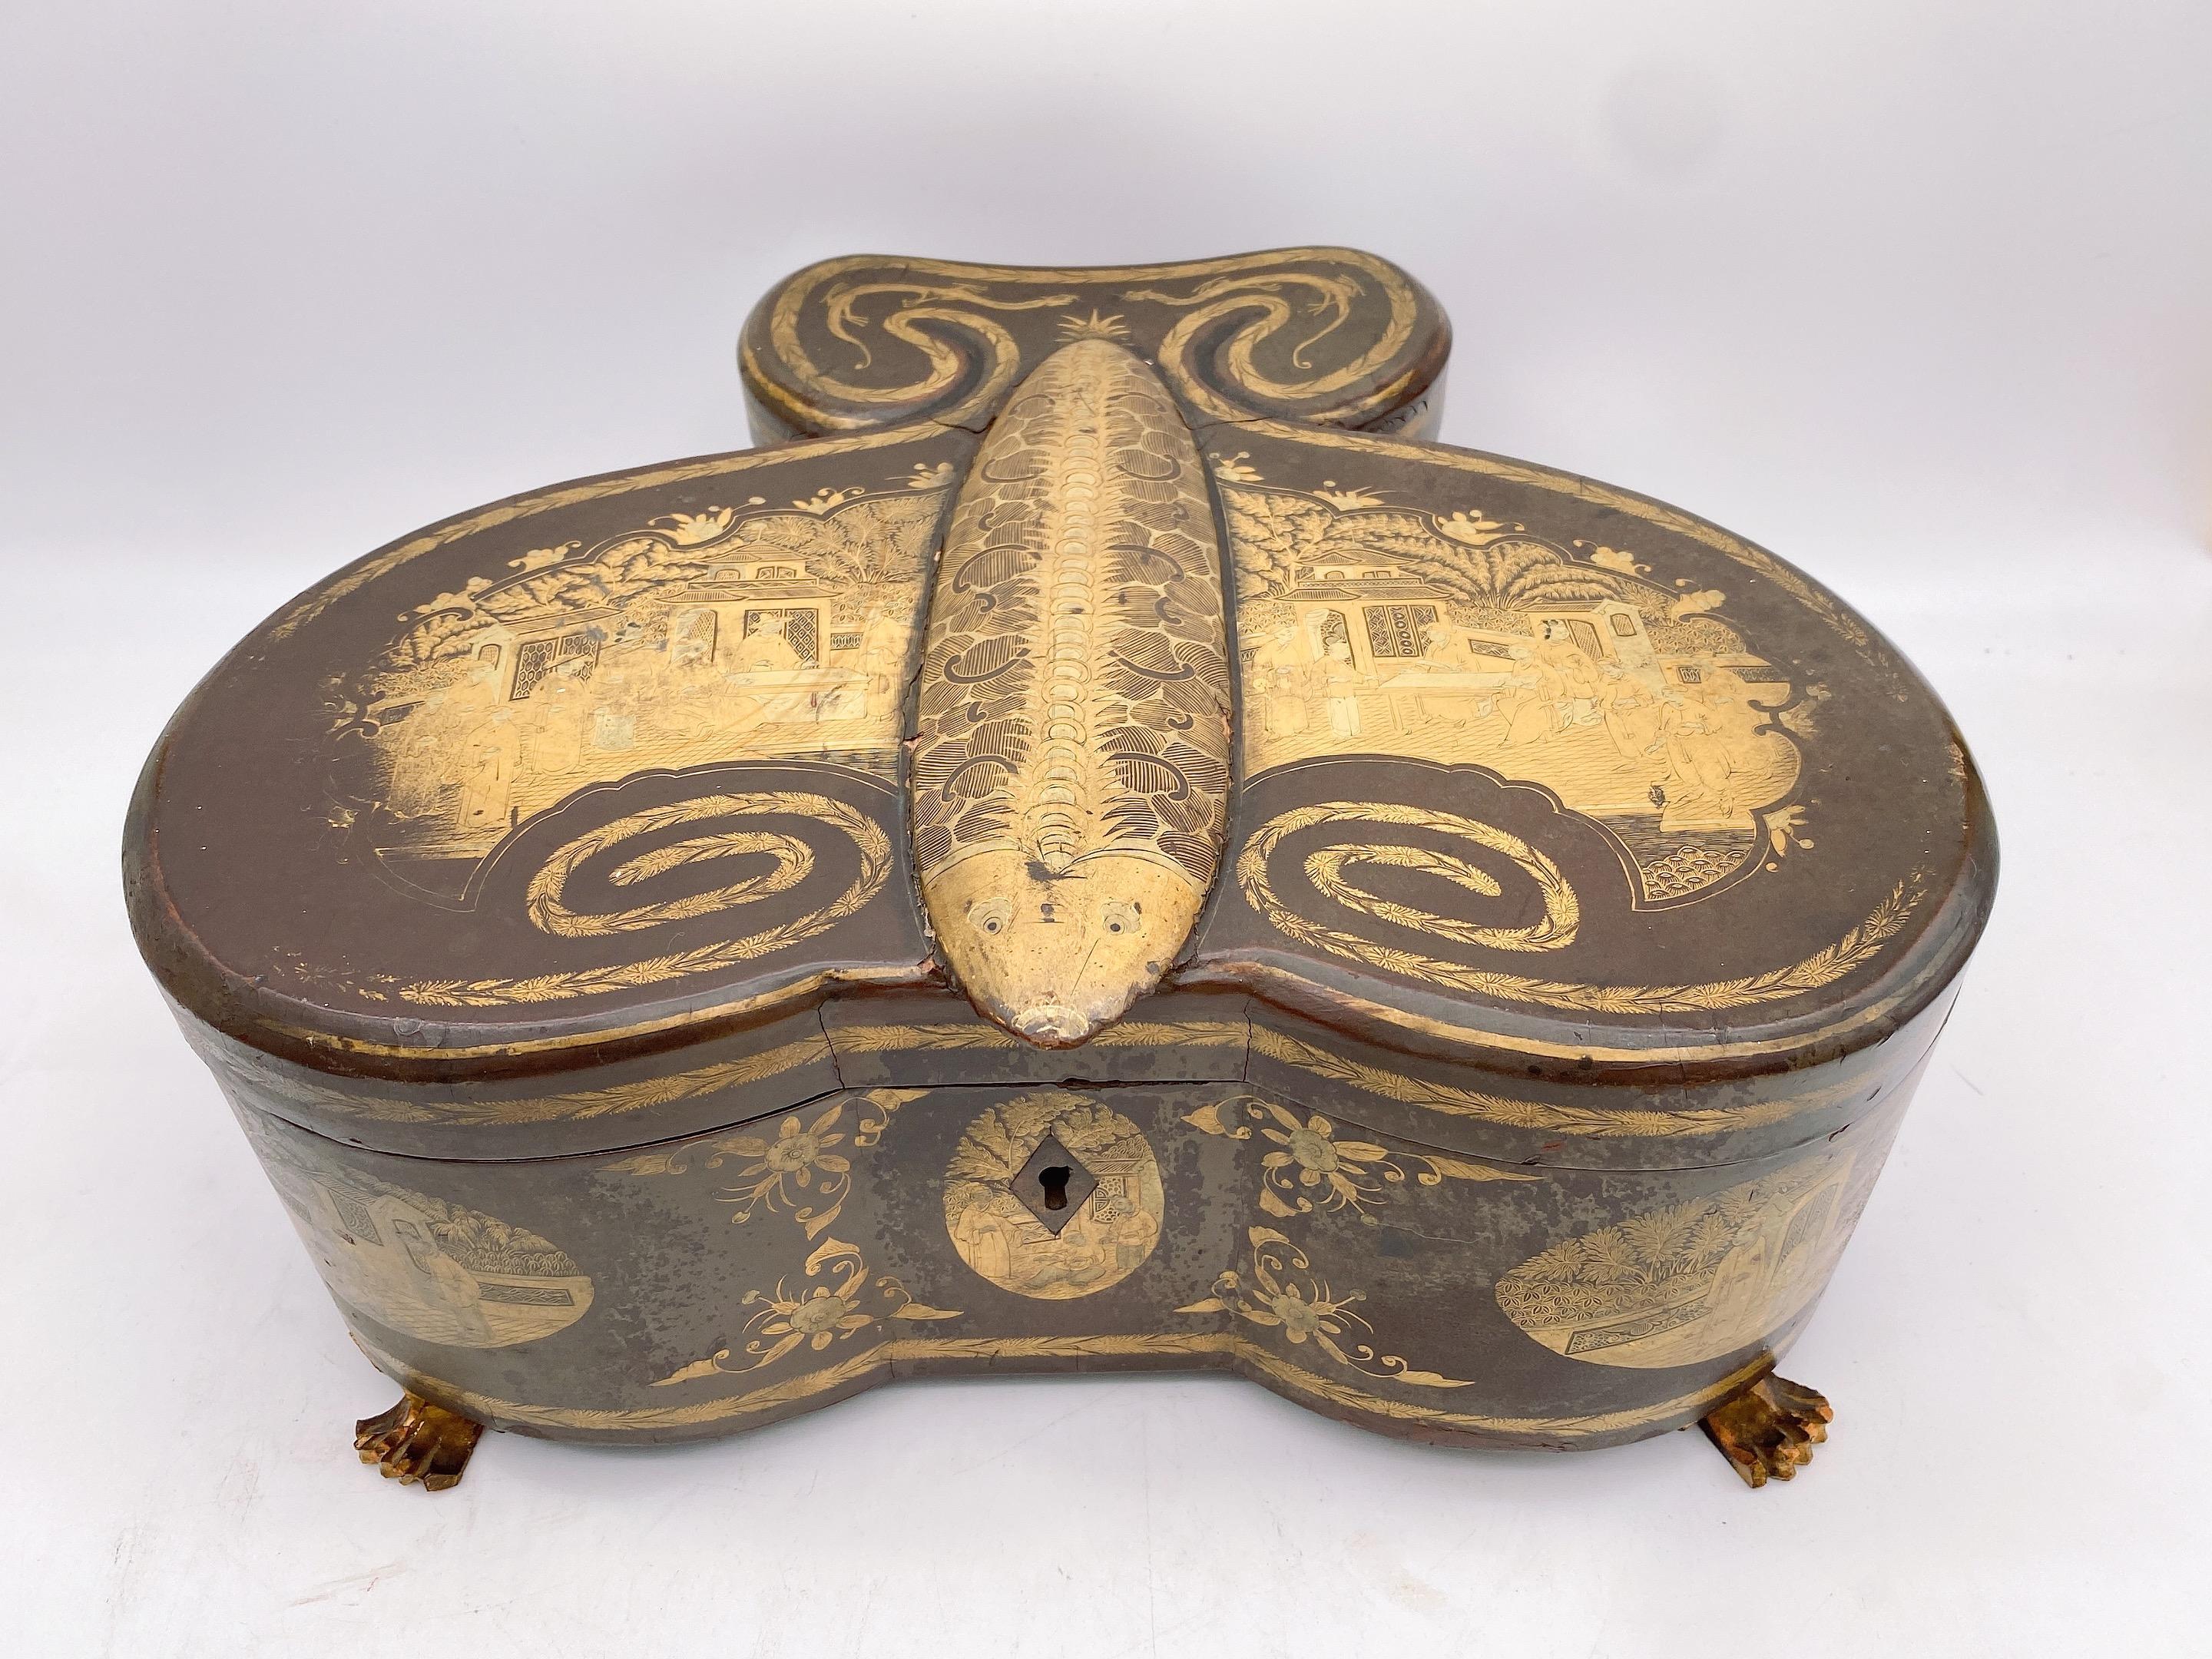 19th Century golden black lacquer Chinese butterfly cased pewter tea caddy with three pewters with 4 foots, the gilt body decorated with panels of landscapes, three pewters dishes have some dents with covers, it is very beautiful unique piece. good